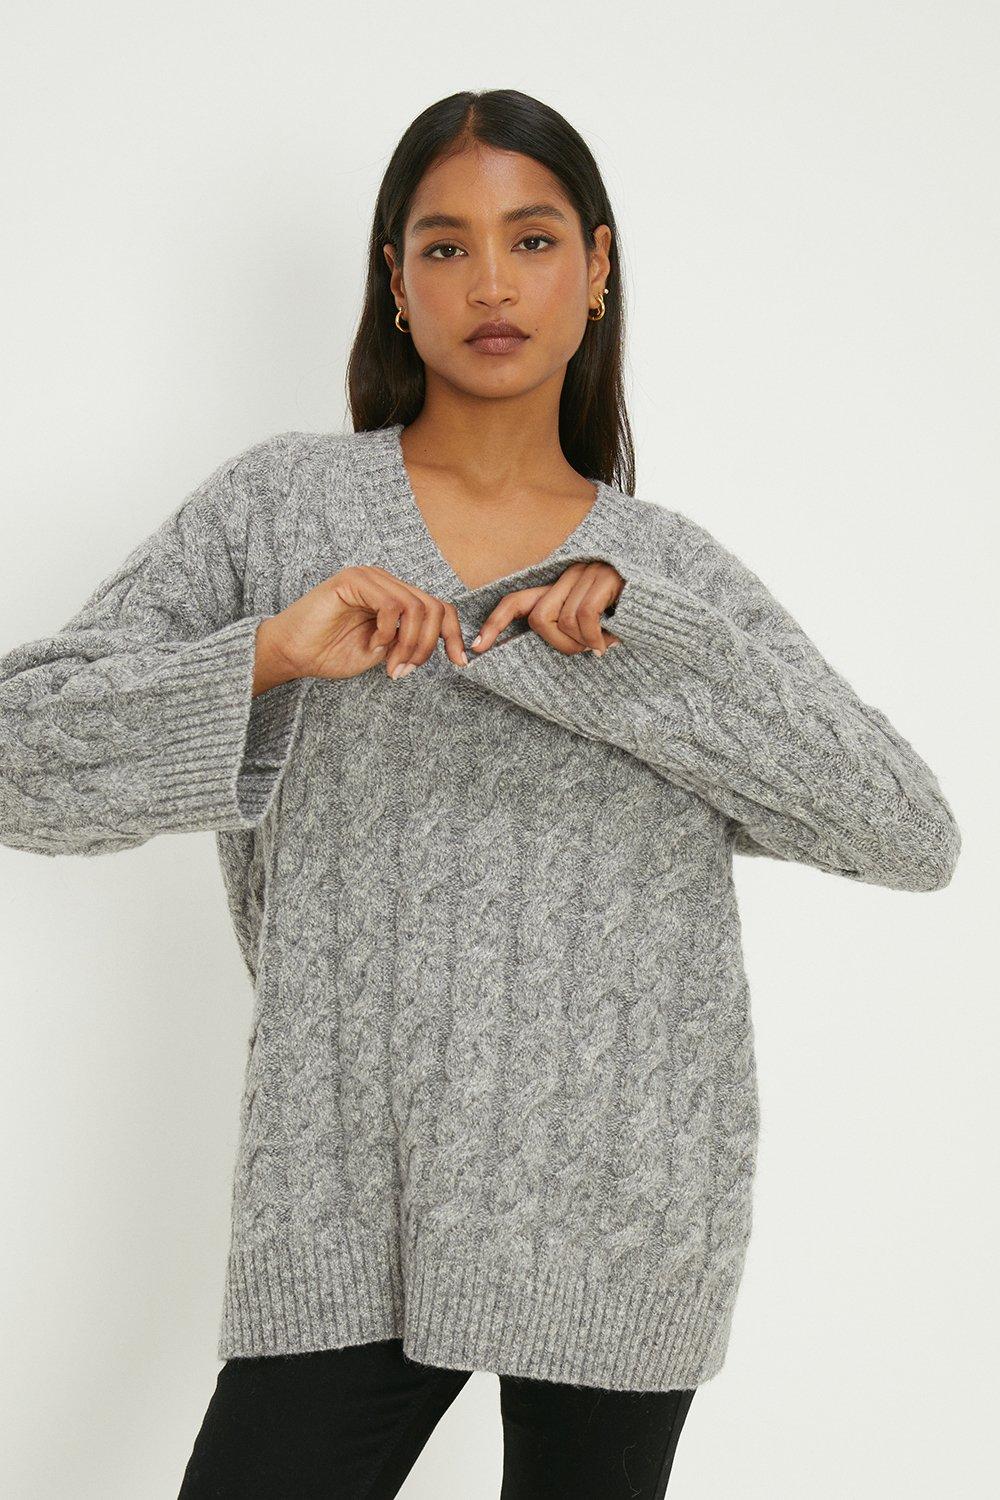 Women's V-Neck Chunky Cable Tunic - grey - XL